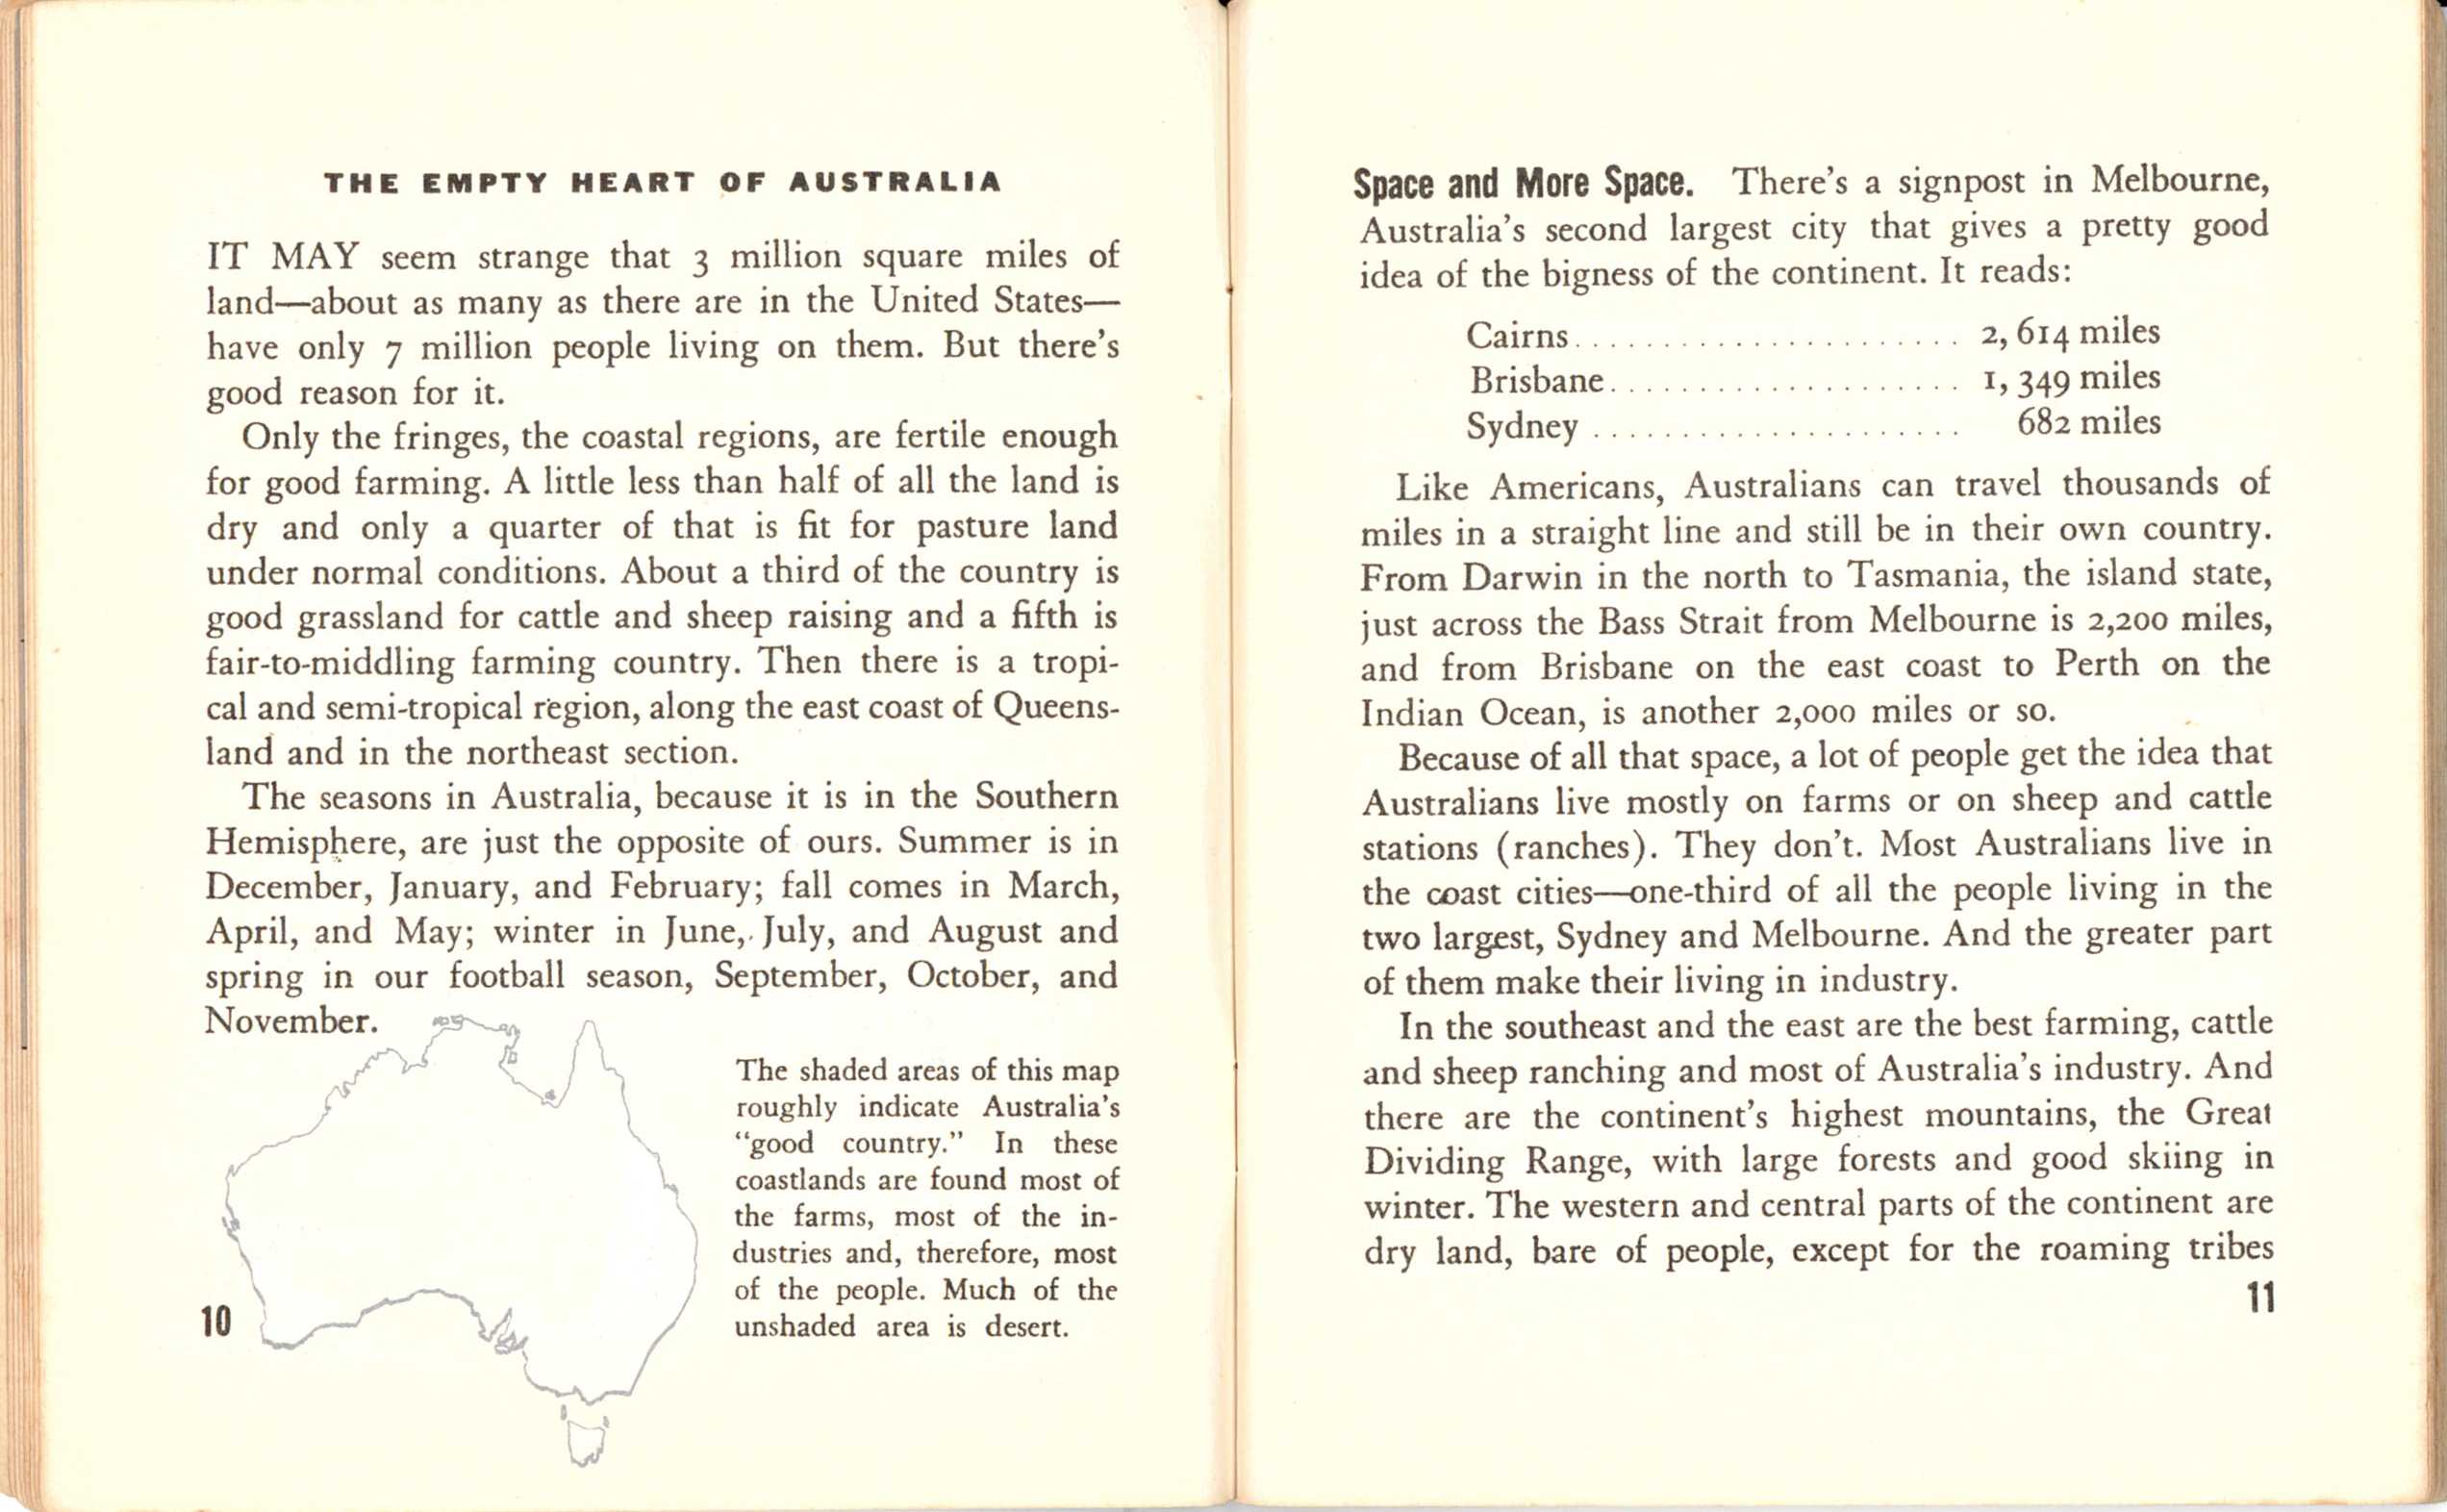 Pocket Guide to Australia page 11